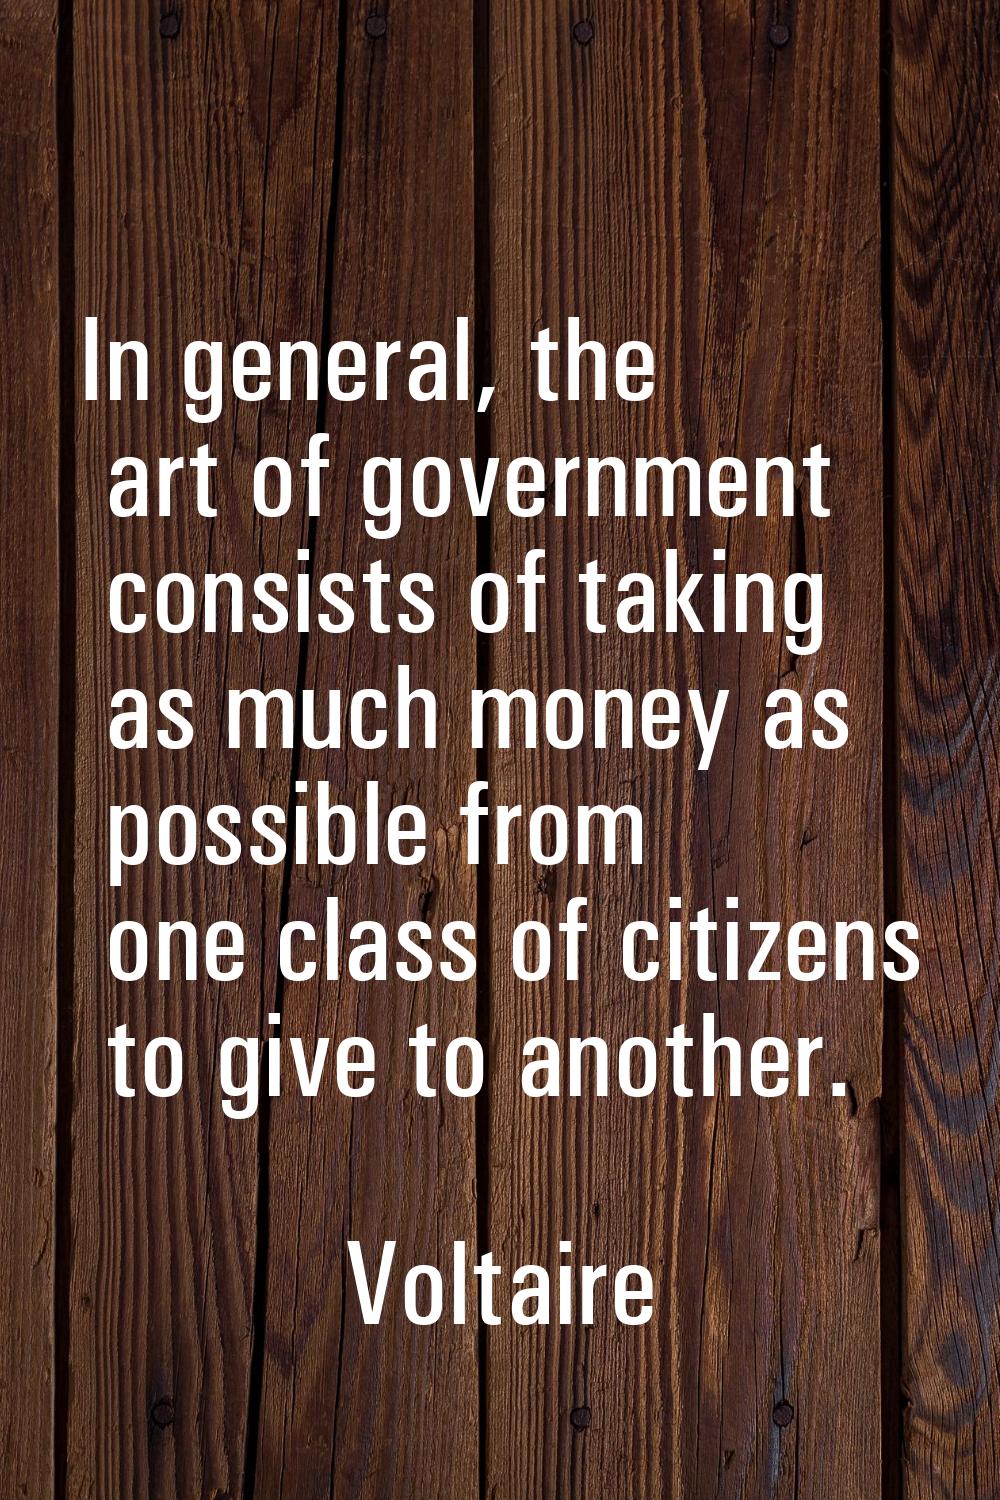 In general, the art of government consists of taking as much money as possible from one class of ci